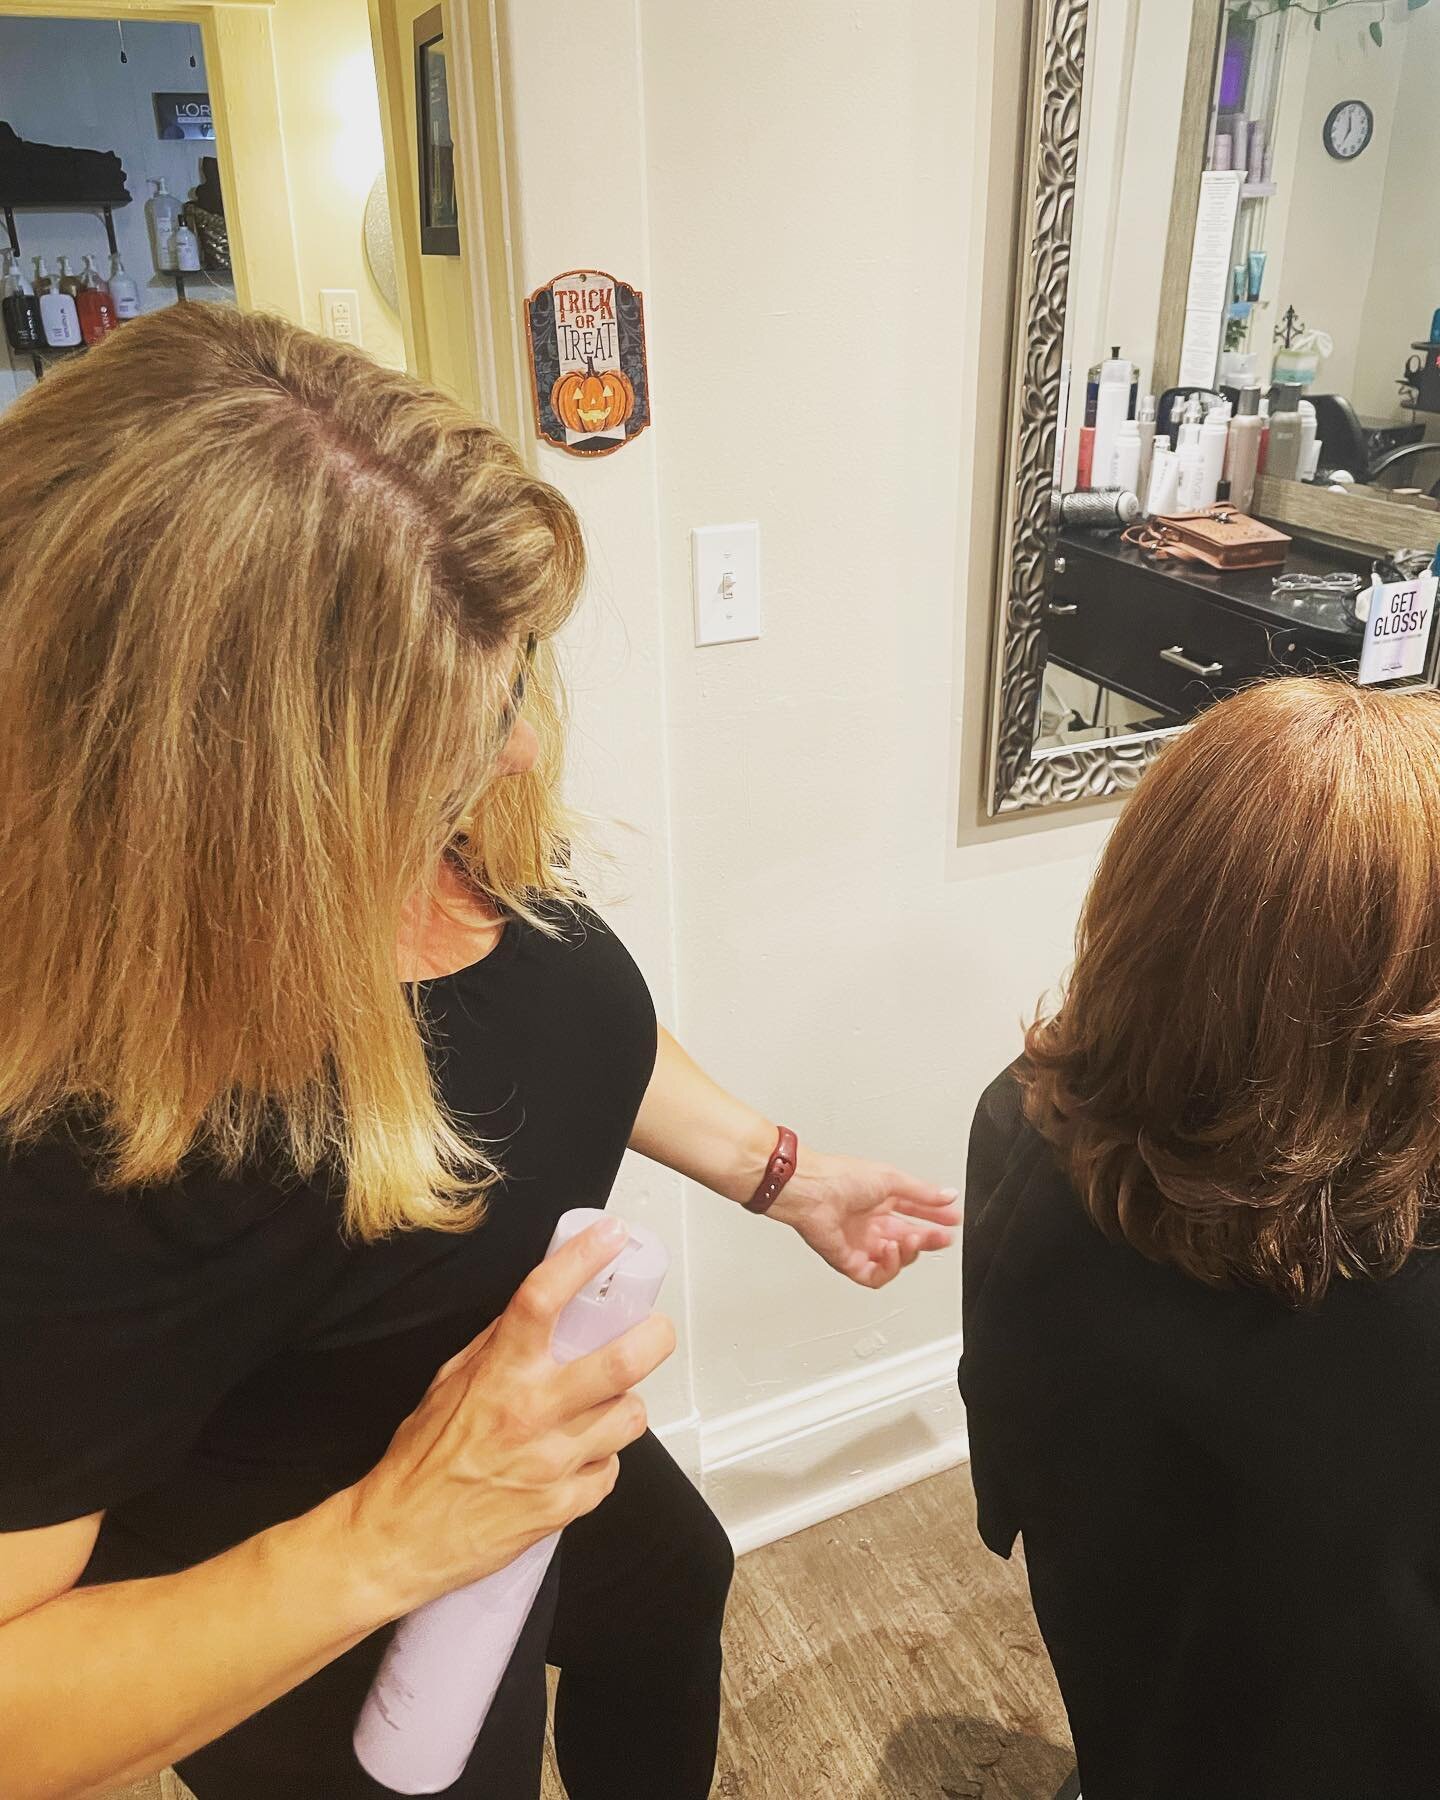 Tricia Purdy, our newest edition, putting the finishing touches on this beautiful haircut!😁 

#sevenhaircares #sevenhaircare #studioblond #757 #757hairstylist #northcolley #hamptonroads #hamptonroadsva #loreal #lorealpro #pureology #salonproorbiting